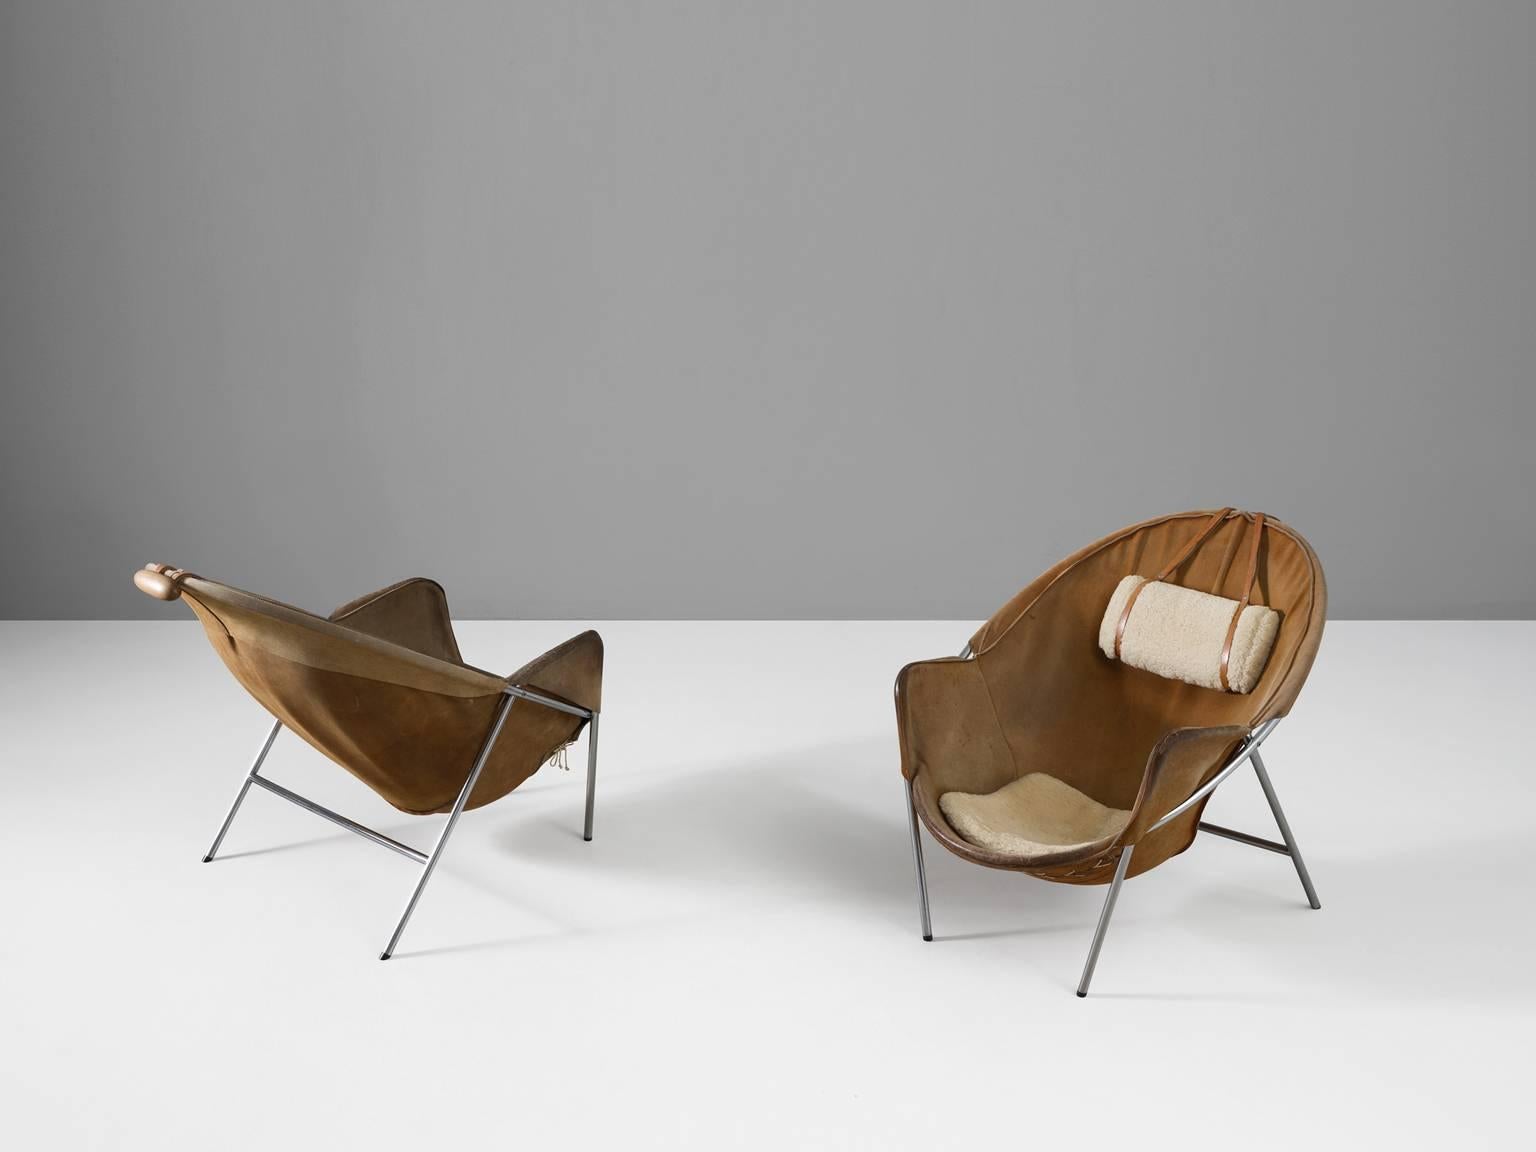 Lounge chair, in metal, suede, fabric and wood, by Erik Ole Jorgensen for Olaf Black, Denmark, 1953. 

Exceptional set of two easy chairs in cognac suede. These sling chairs consist of a chromed tubular frame in which the suede seating hangs.